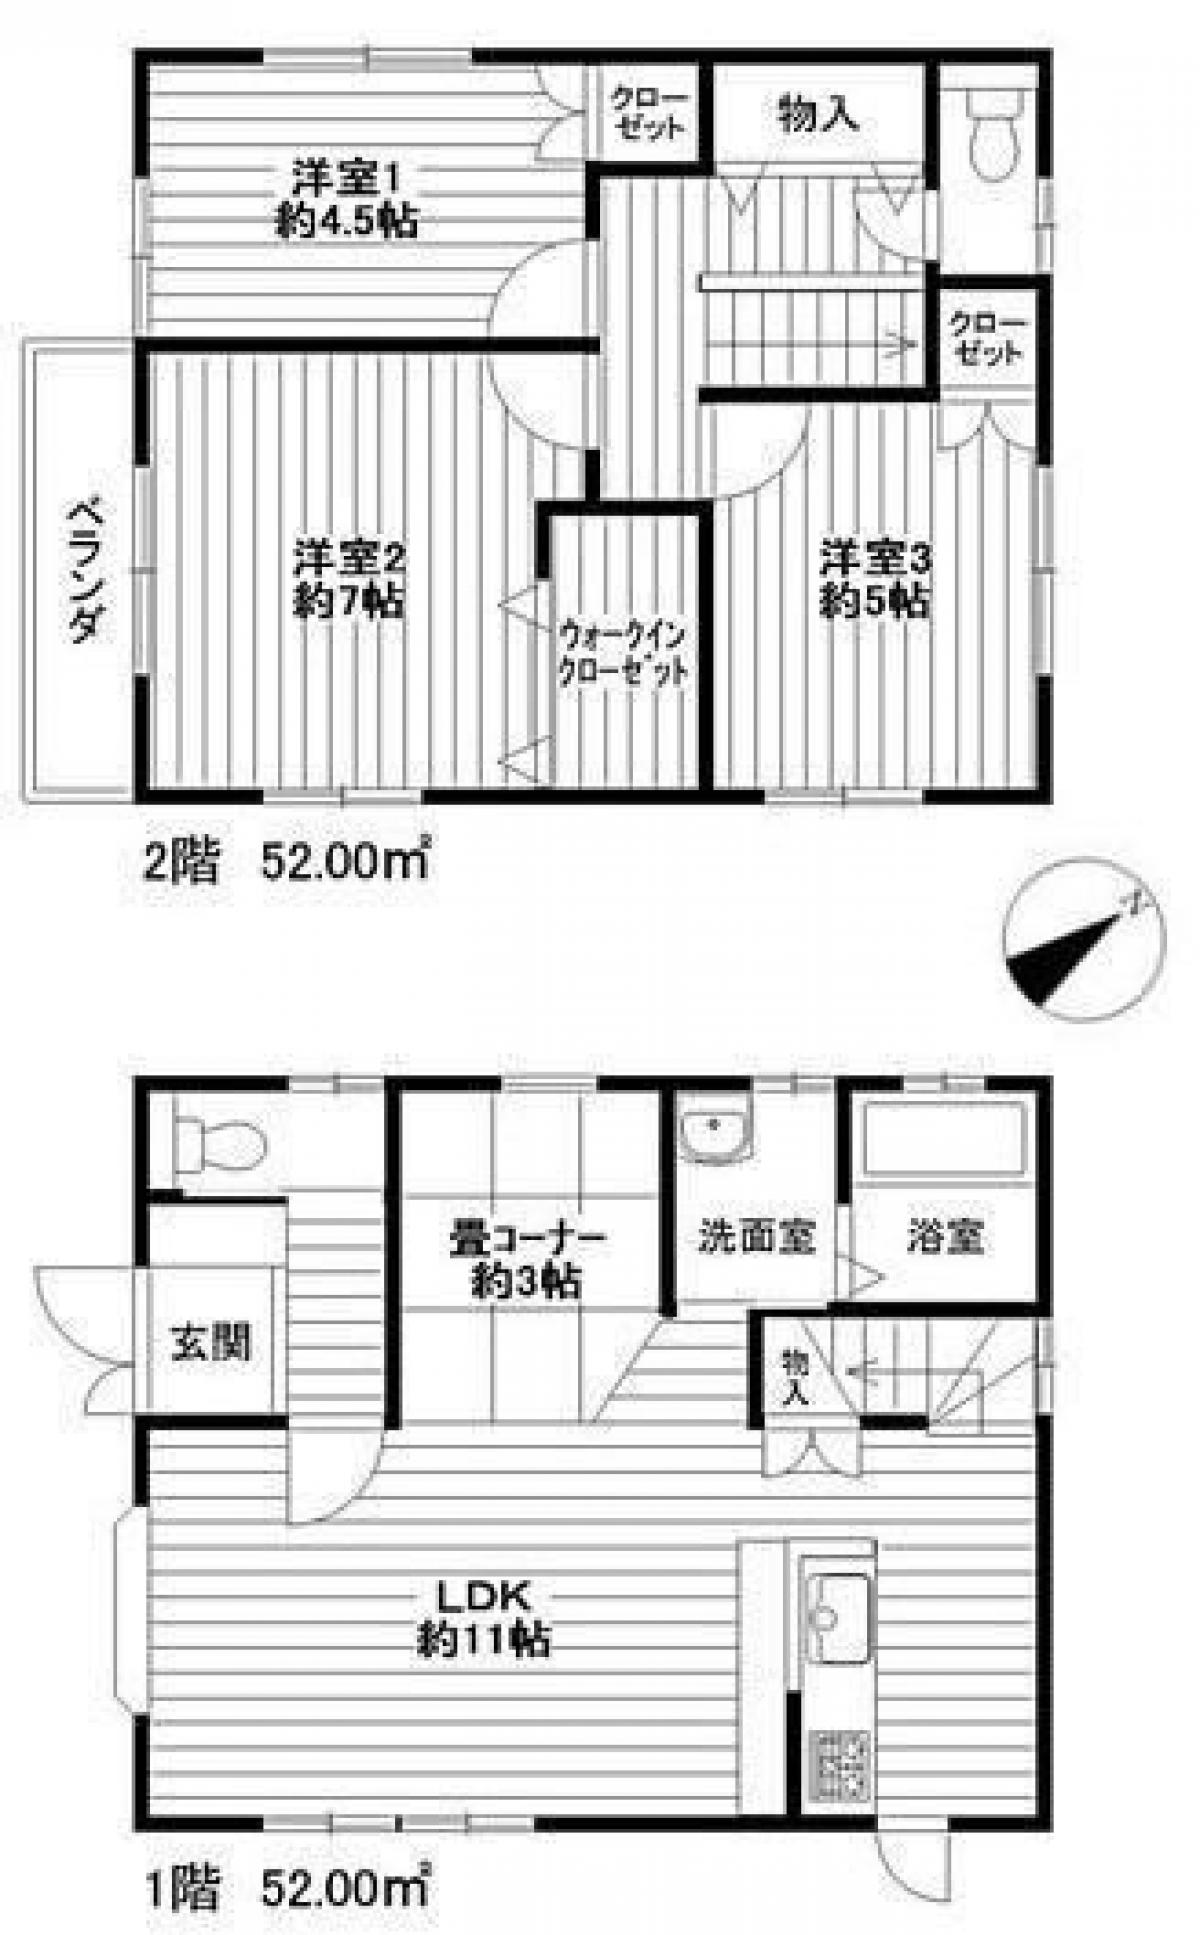 Picture of Home For Sale in Hamura Shi, Tokyo, Japan